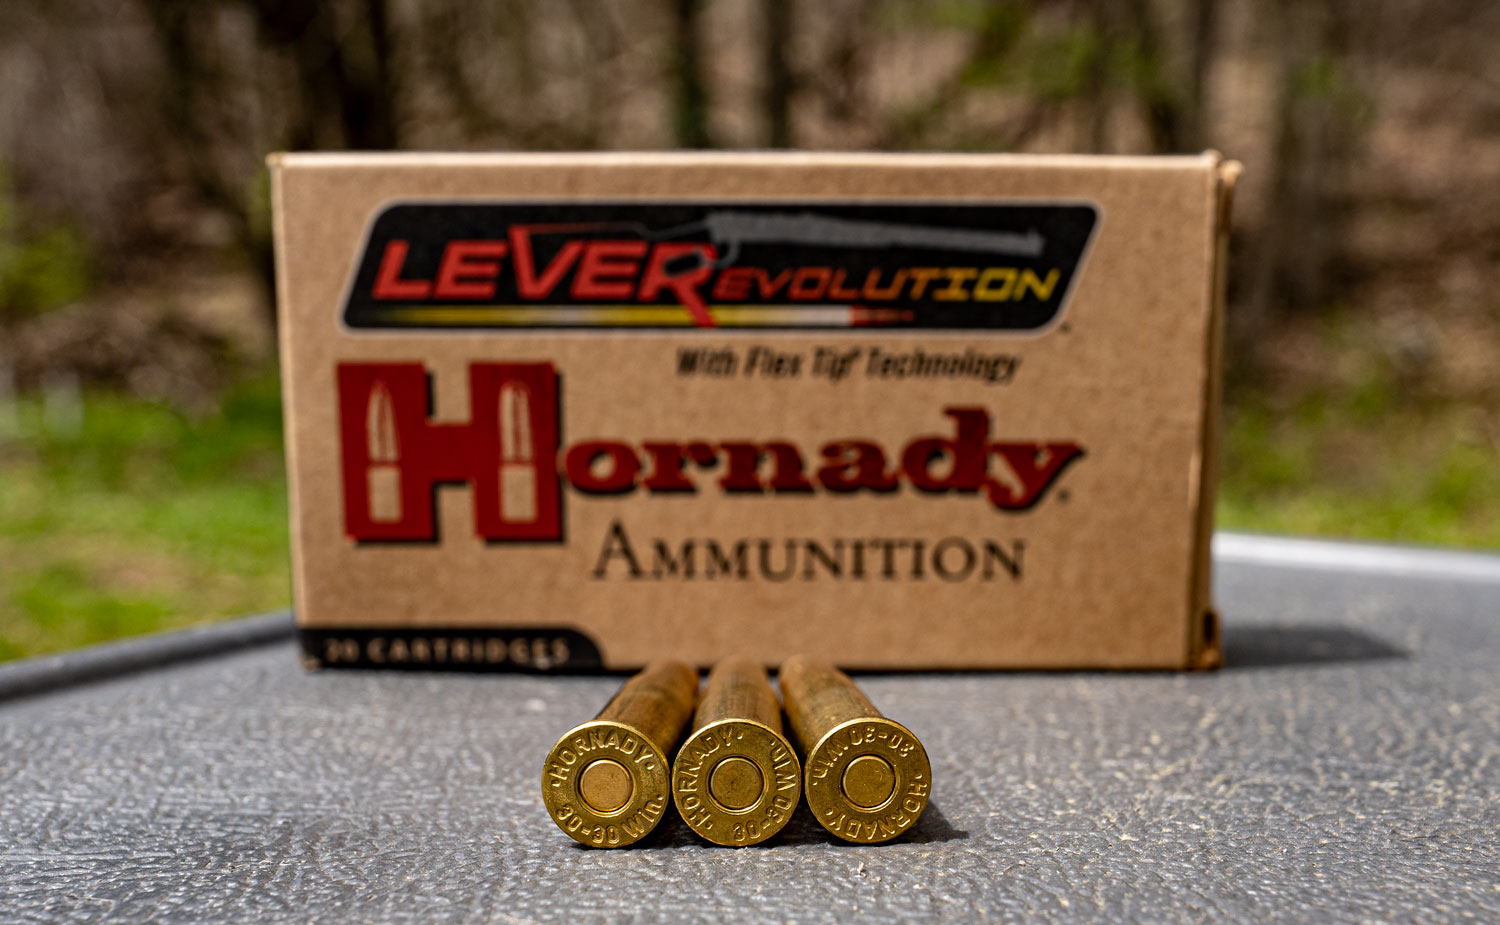 LeveRevolution ammo on a table with box